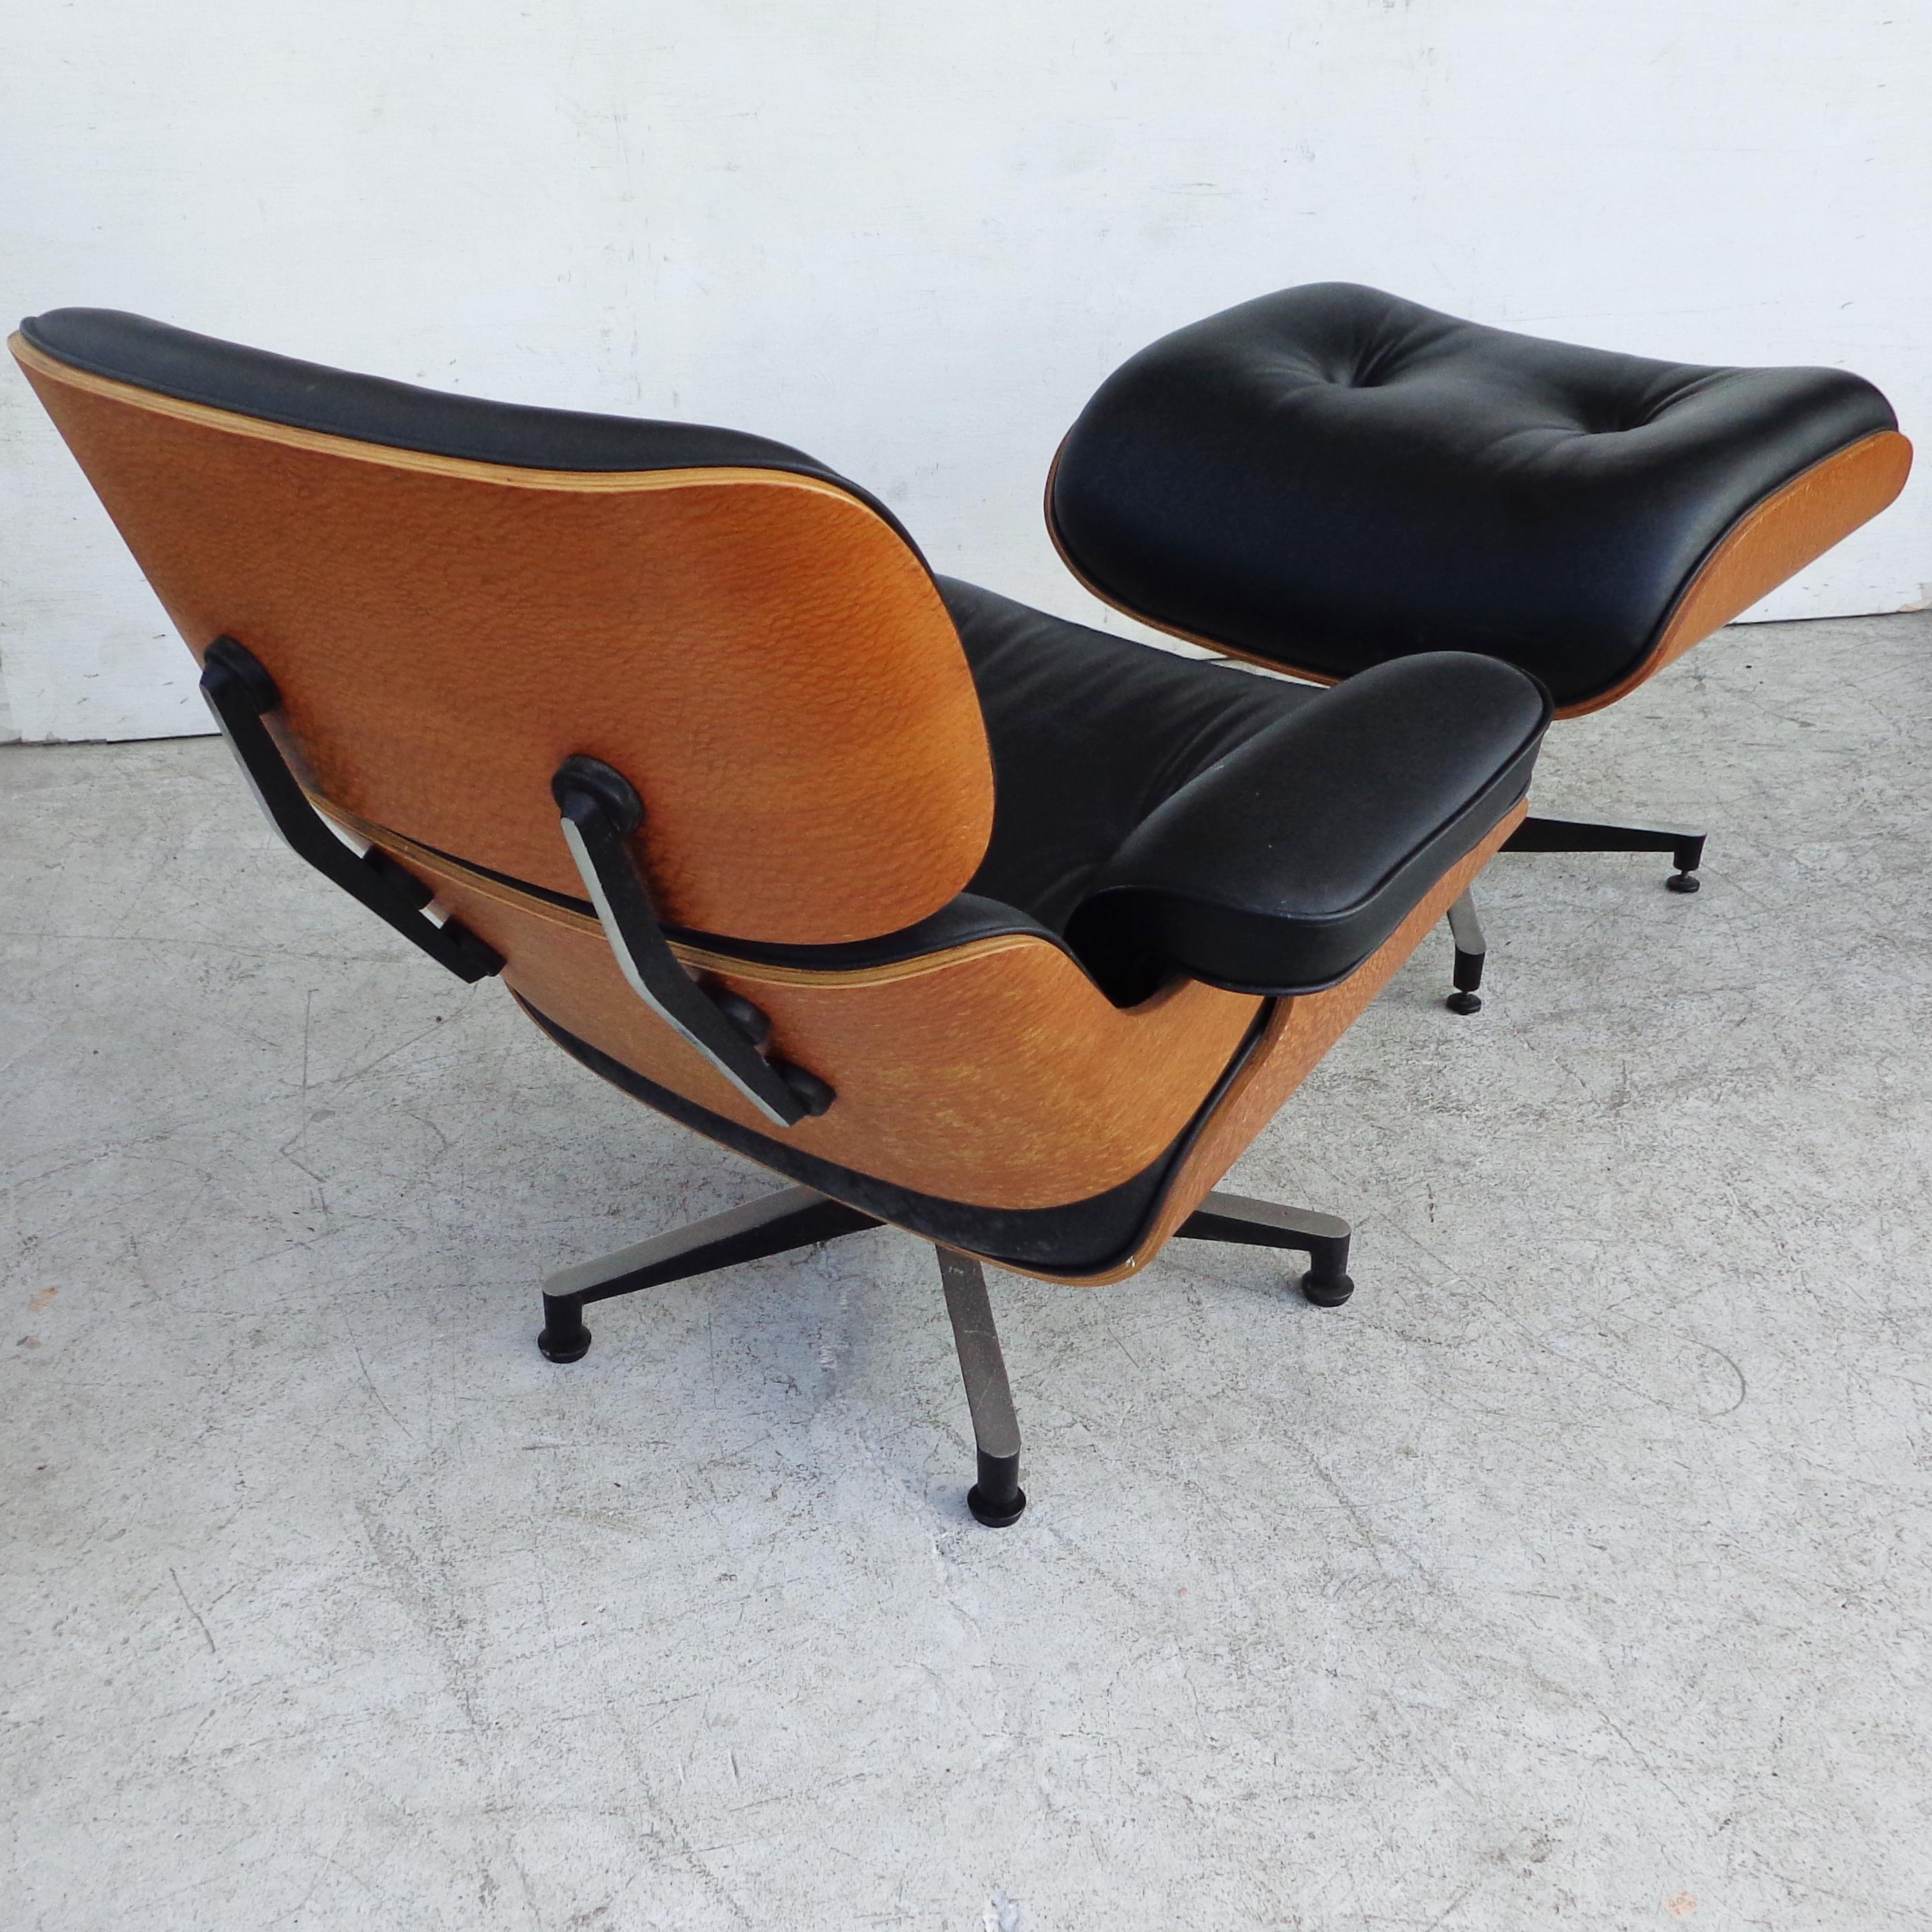 Brazilian Artesia Eames Lounge and ottoman

Constructed of Brazilian woods and leather, this is a fine example of a mid century modern classic.


Ottoman: 26